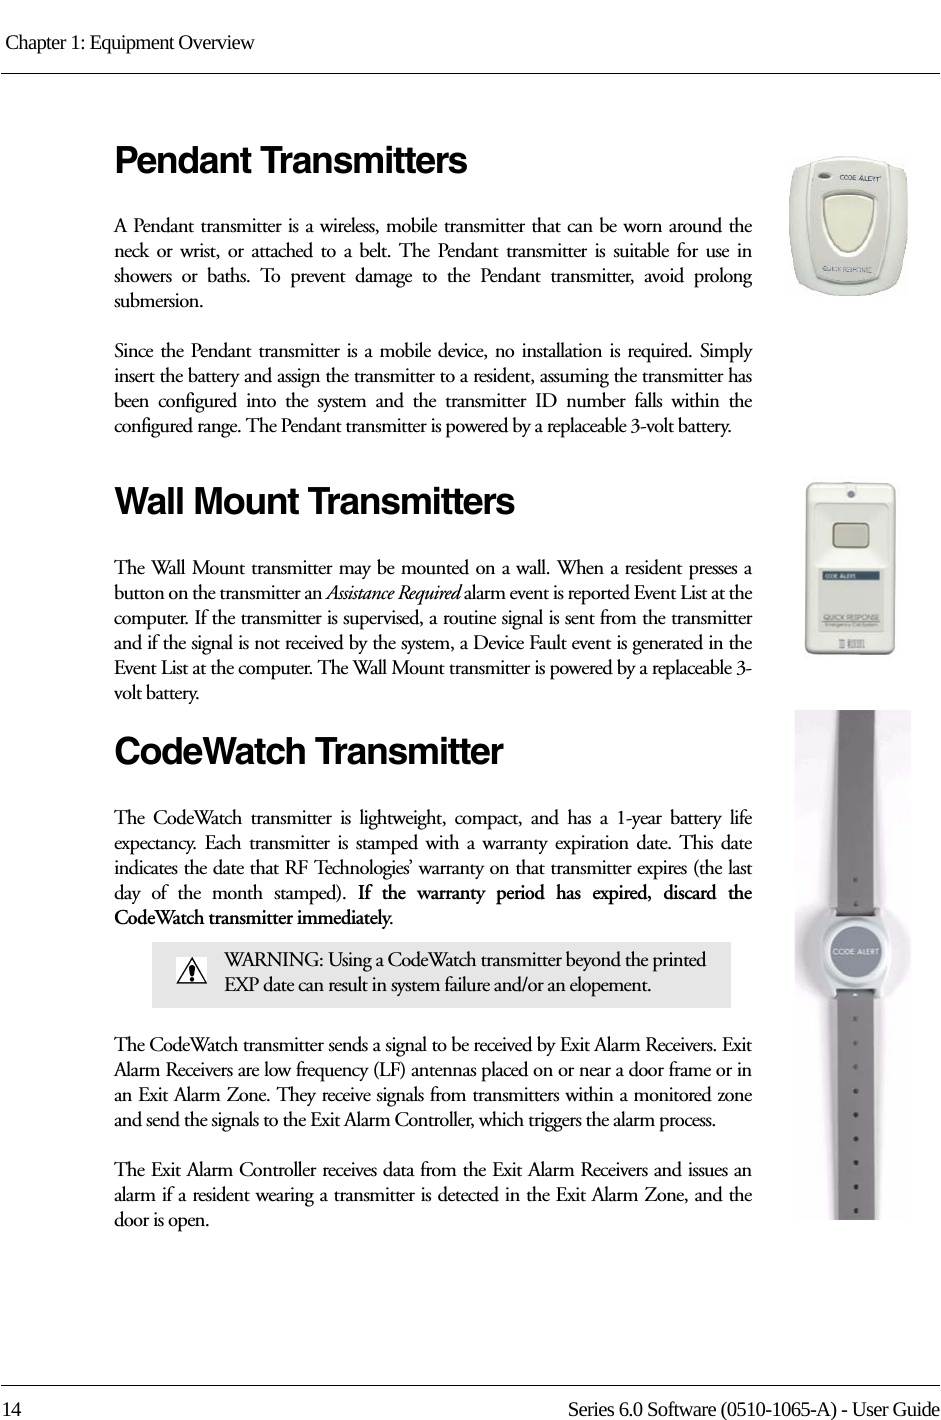 Chapter 1: Equipment Overview 14 Series 6.0 Software (0510-1065-A) - User GuidePendant TransmittersA Pendant transmitter is a wireless, mobile transmitter that can be worn around the neck or wrist, or attached to a belt. The Pendant transmitter is suitable for use in showers or baths. To prevent damage to the Pendant transmitter, avoid prolong submersion. Since the Pendant transmitter is a mobile device, no installation is required. Simply insert the battery and assign the transmitter to a resident, assuming the transmitter has been configured into the system and the transmitter ID number falls within the configured range. The Pendant transmitter is powered by a replaceable 3-volt battery. Wall Mount TransmittersThe Wall Mount transmitter may be mounted on a wall. When a resident presses a button on the transmitter an Assistance Required alarm event is reported Event List at the computer. If the transmitter is supervised, a routine signal is sent from the transmitter and if the signal is not received by the system, a Device Fault event is generated in the Event List at the computer. The Wall Mount transmitter is powered by a replaceable 3-volt battery. CodeWatch TransmitterThe CodeWatch transmitter is lightweight, compact, and has a 1-year battery life expectancy. Each transmitter is stamped with a warranty expiration date. This date indicates the date that RF Technologies’ warranty on that transmitter expires (the last day of the month stamped). If the warranty period has expired, discard the CodeWatch transmitter immediately.The CodeWatch transmitter sends a signal to be received by Exit Alarm Receivers. Exit Alarm Receivers are low frequency (LF) antennas placed on or near a door frame or in an Exit Alarm Zone. They receive signals from transmitters within a monitored zone and send the signals to the Exit Alarm Controller, which triggers the alarm process. The Exit Alarm Controller receives data from the Exit Alarm Receivers and issues an alarm if a resident wearing a transmitter is detected in the Exit Alarm Zone, and the door is open. WARNING: Using a CodeWatch transmitter beyond the printed EXP date can result in system failure and/or an elopement.